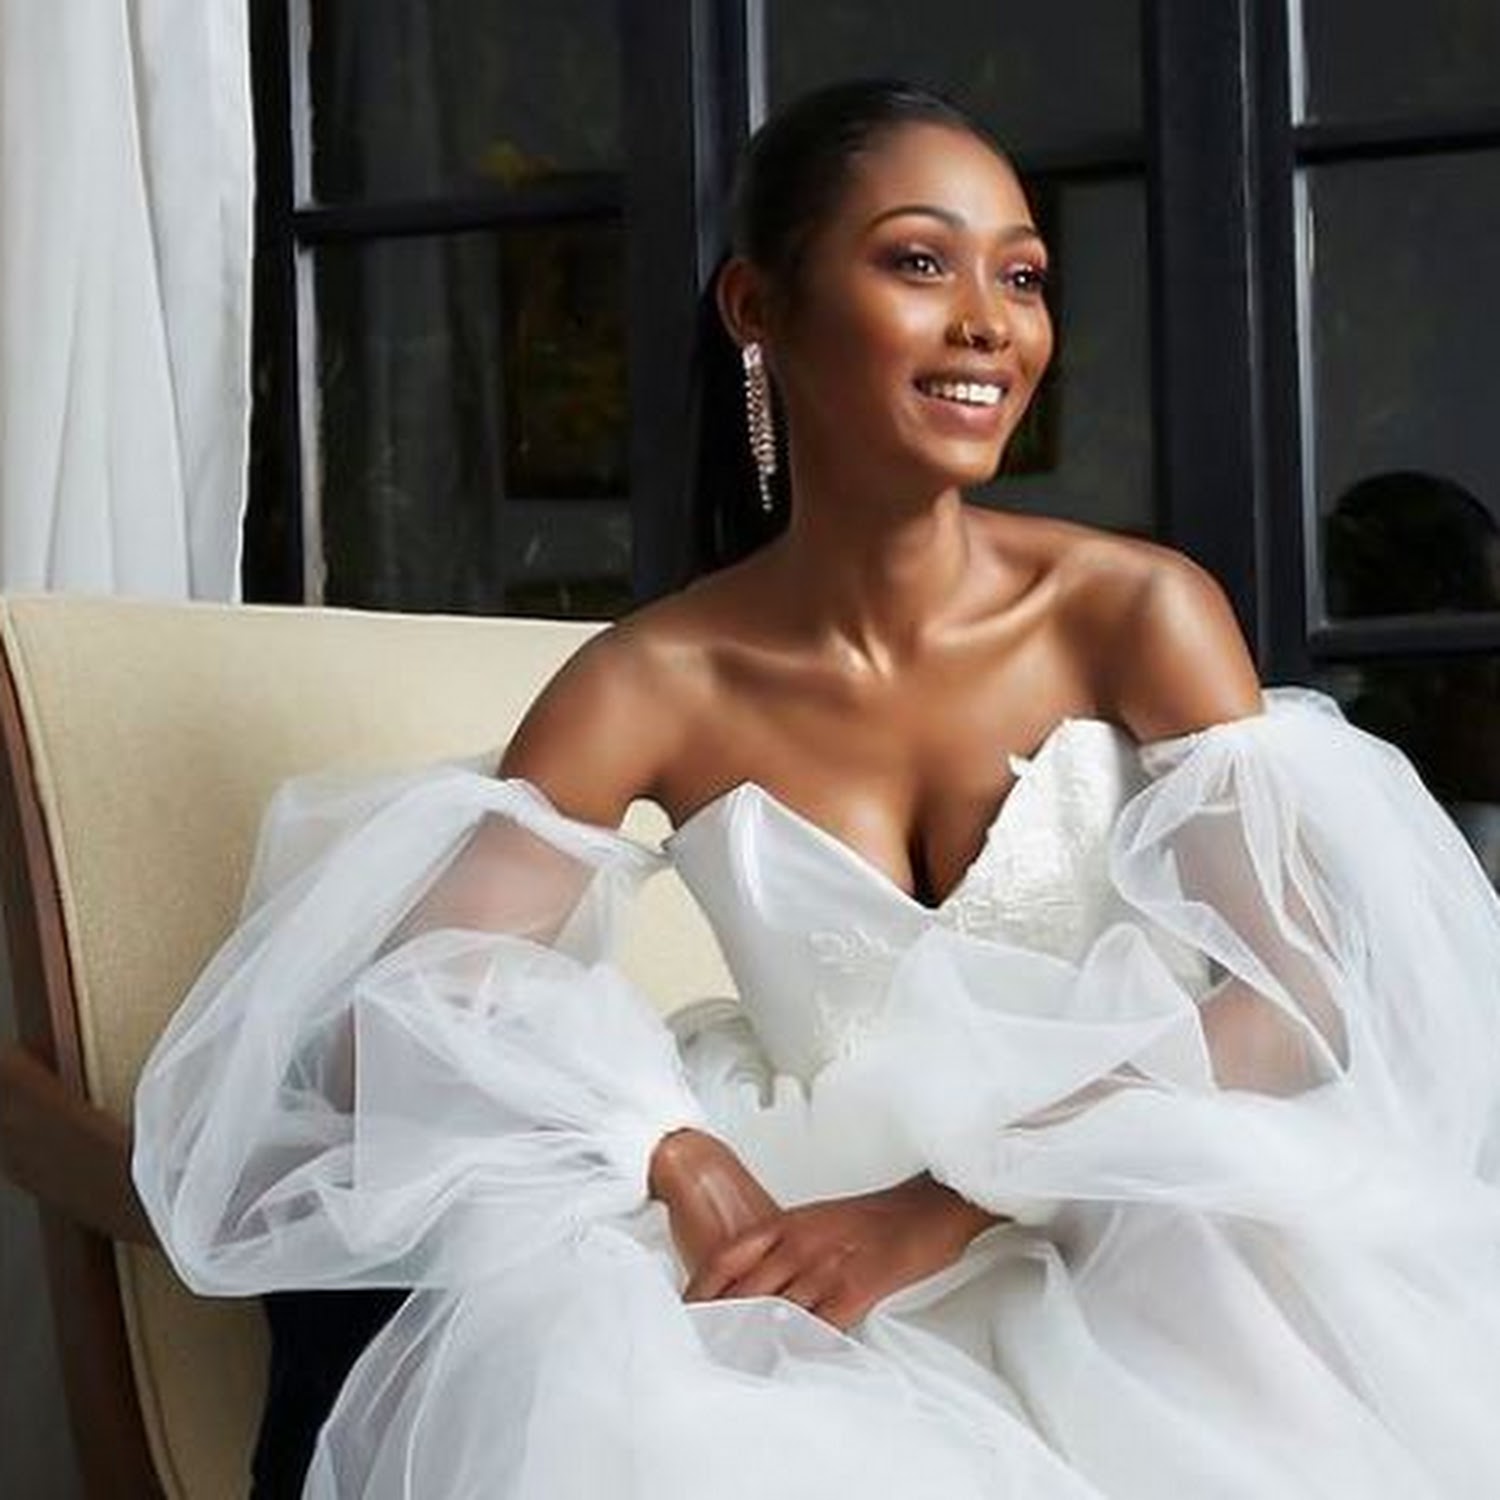 Riky Rick's Wife, Bianca Naidoo Biography: Age, Children, Net Worth, Instagram, Wikipedia, Pictures